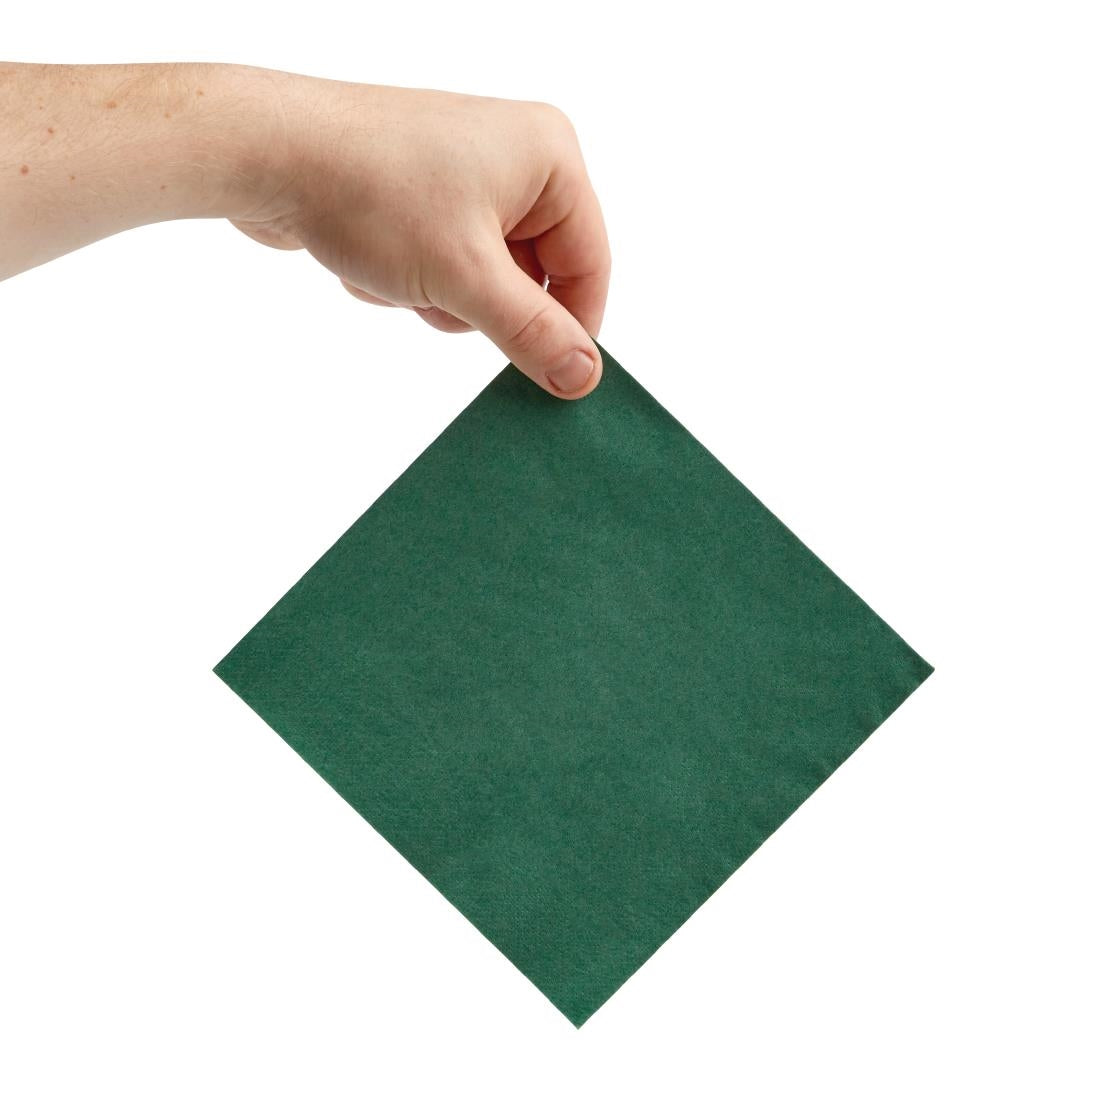 FE223 Fiesta Recyclable Lunch Napkin Green 33x33cm 2ply 1/4 Fold (Pack of 2000) JD Catering Equipment Solutions Ltd